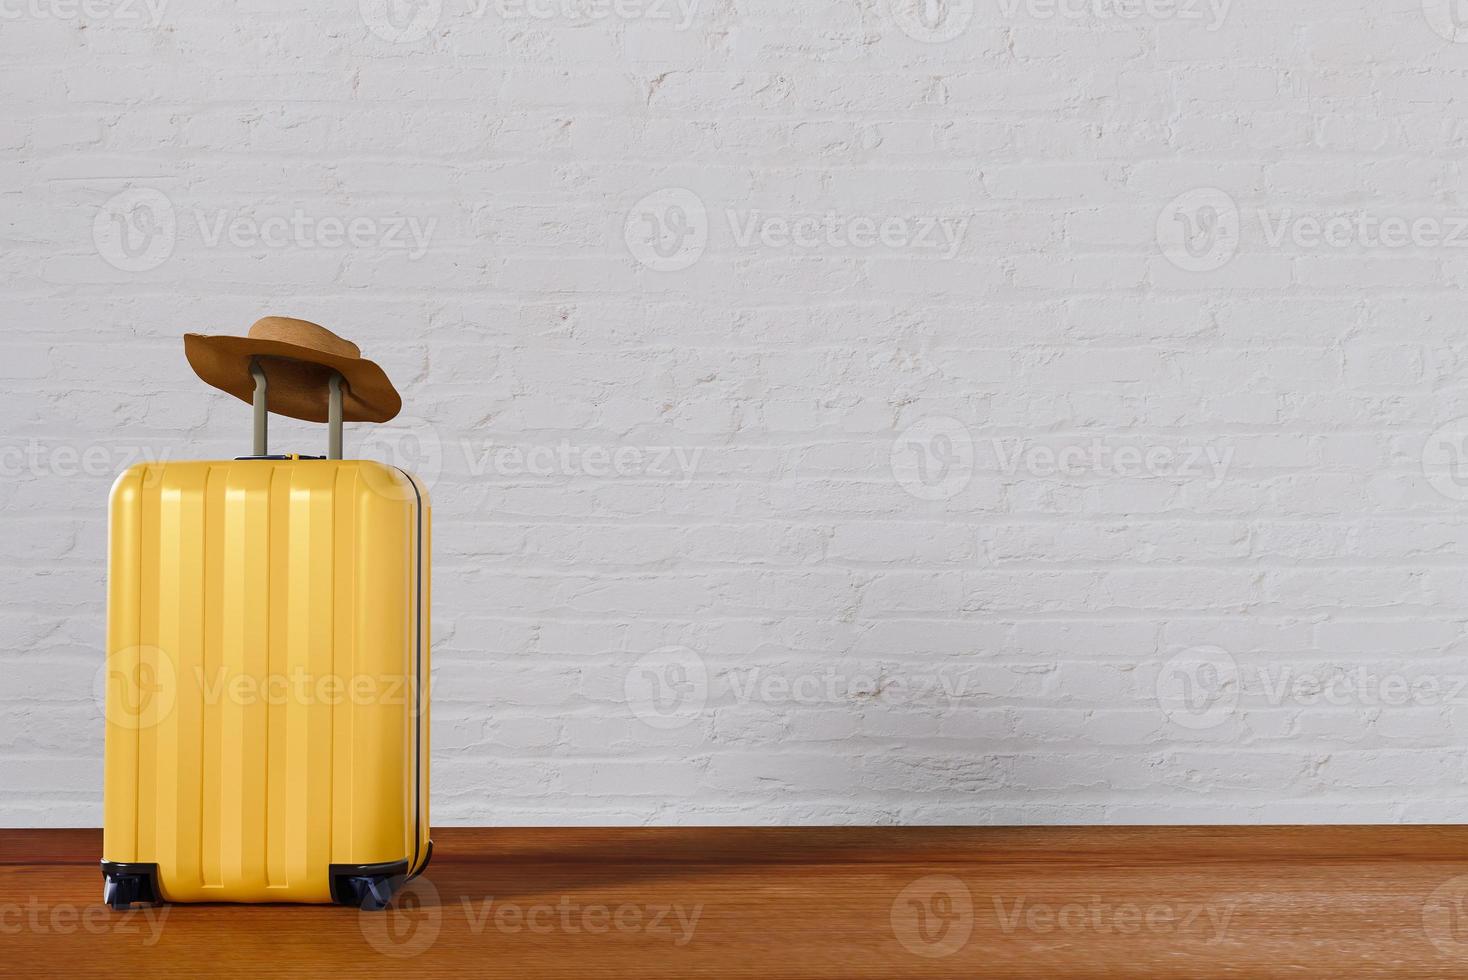 Yellow luggage hat on top summer travel tourism banner background design on white wall wooden floor leisure vacation 3d rendering image photo